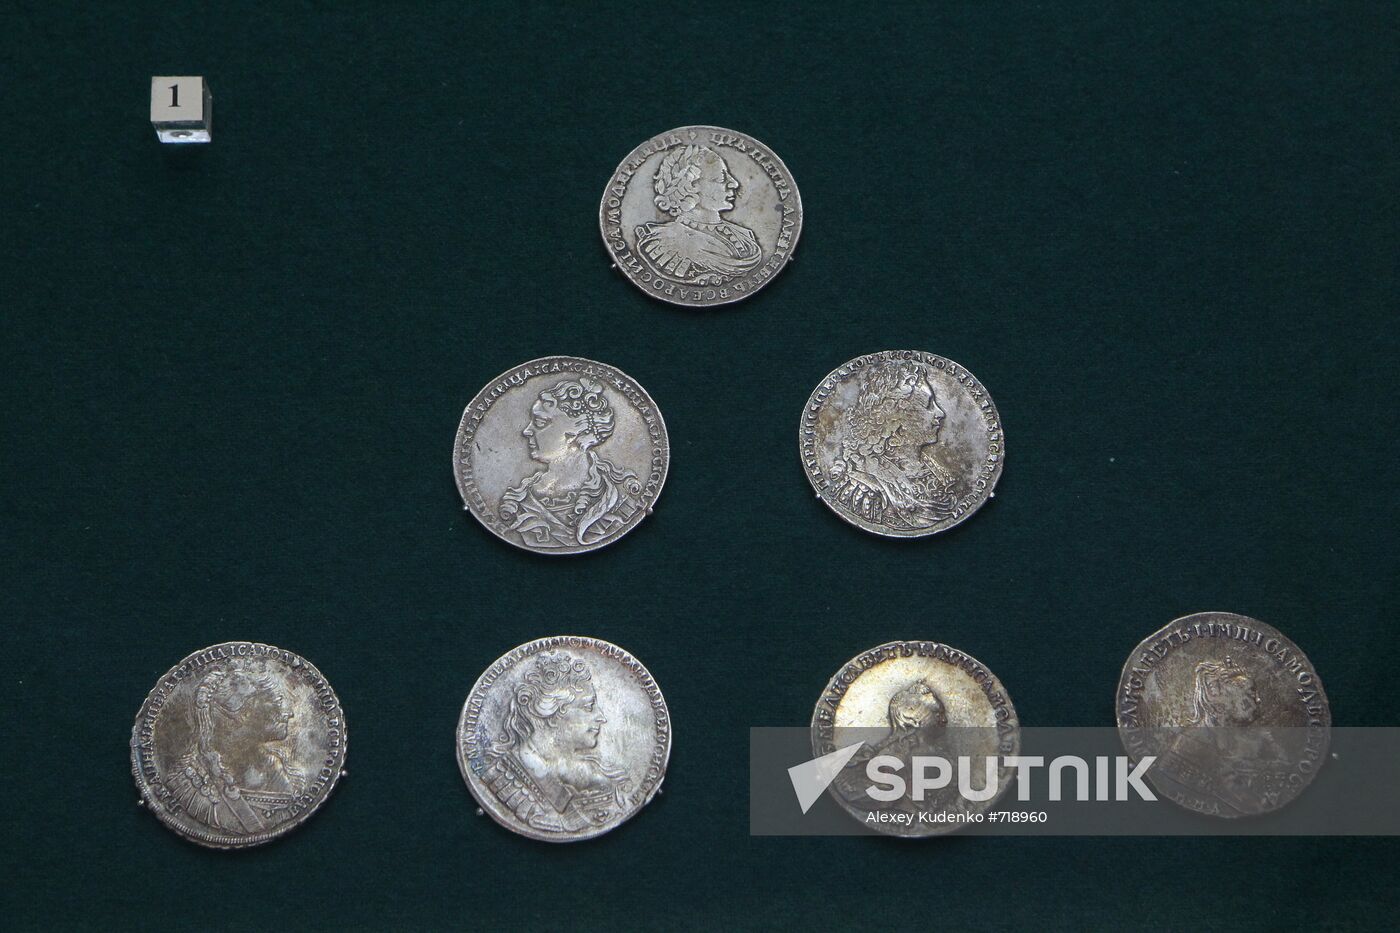 18th century Russian coins